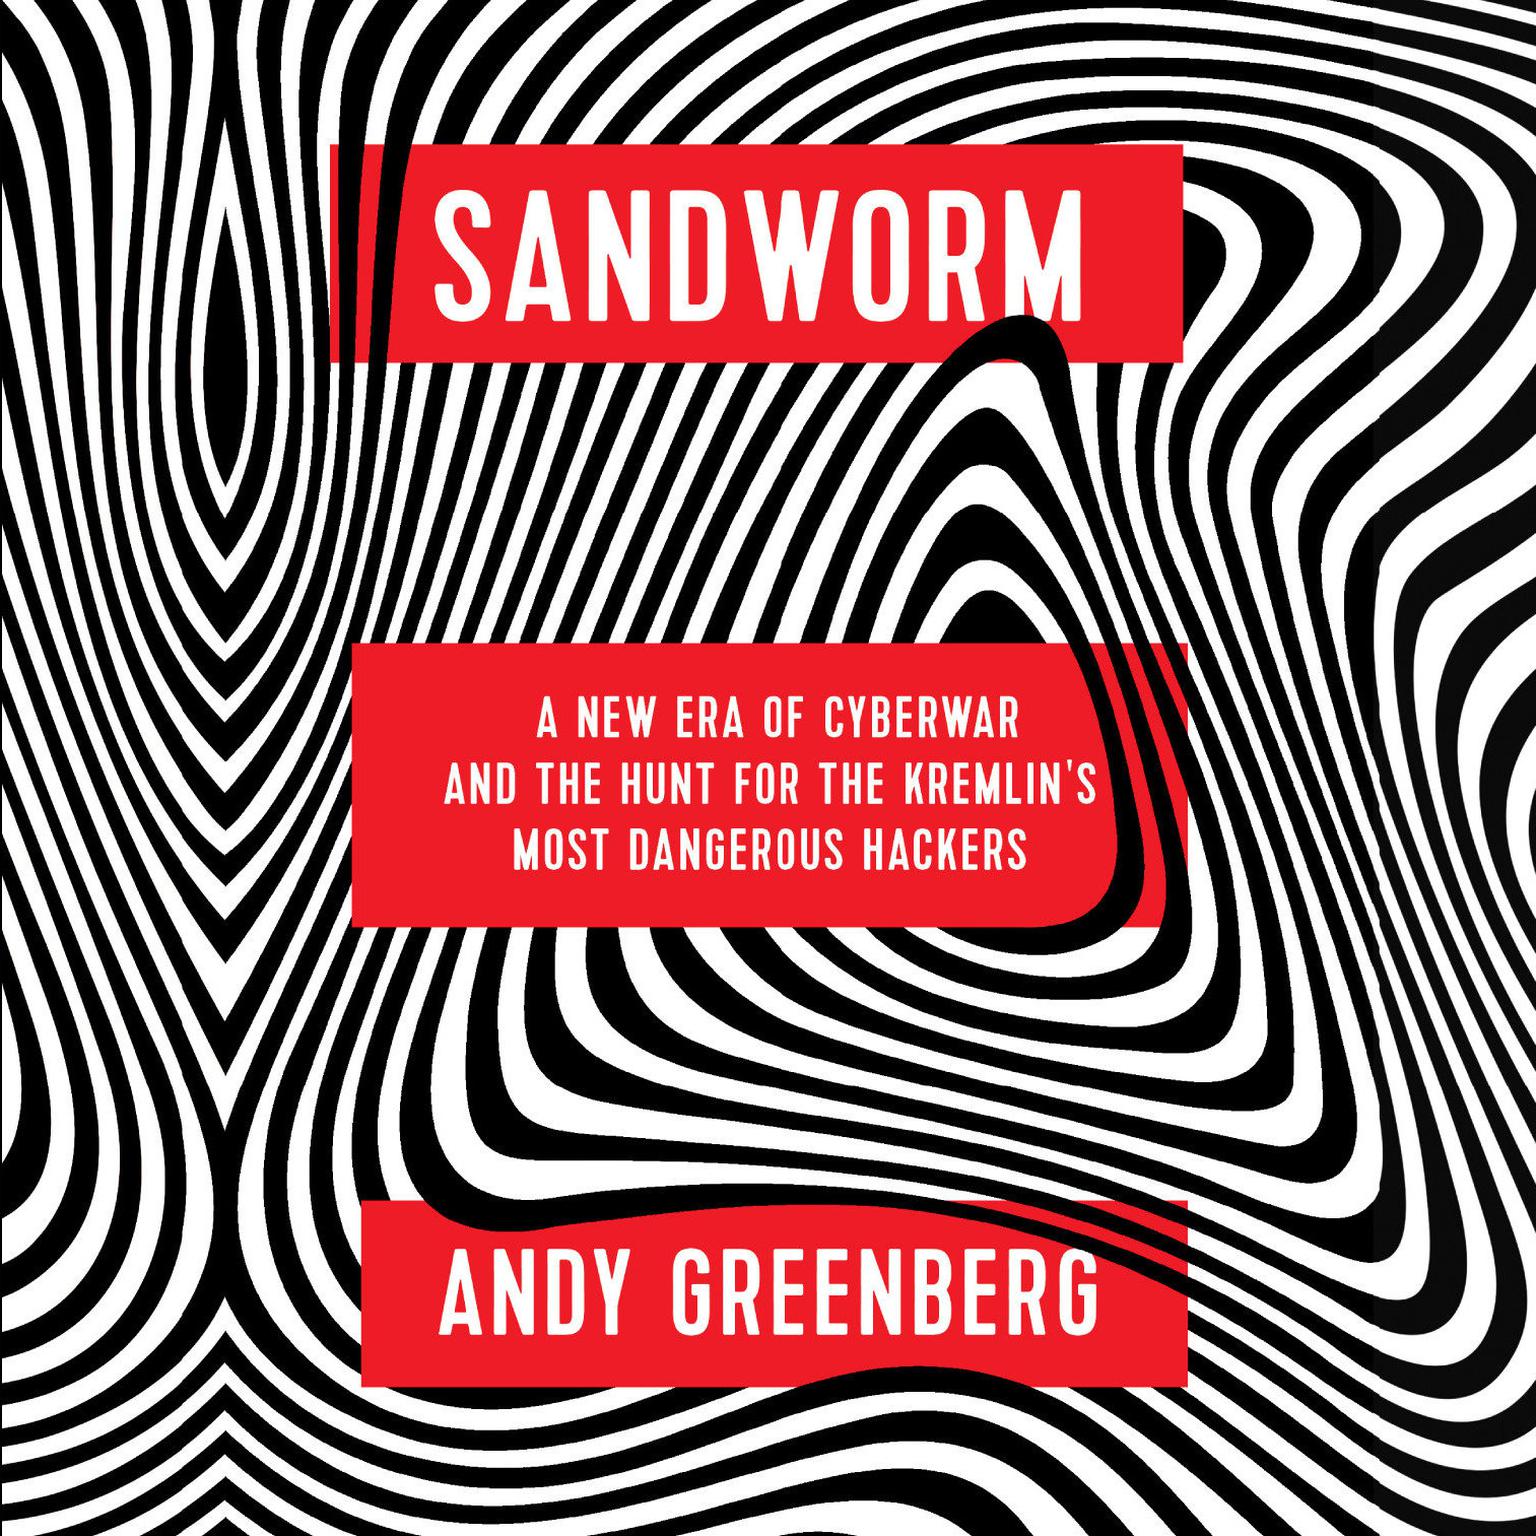 Sandworm: A New Era of Cyberwar and the Hunt for the Kremlins Most Dangerous Hackers Audiobook, by Andy Greenberg